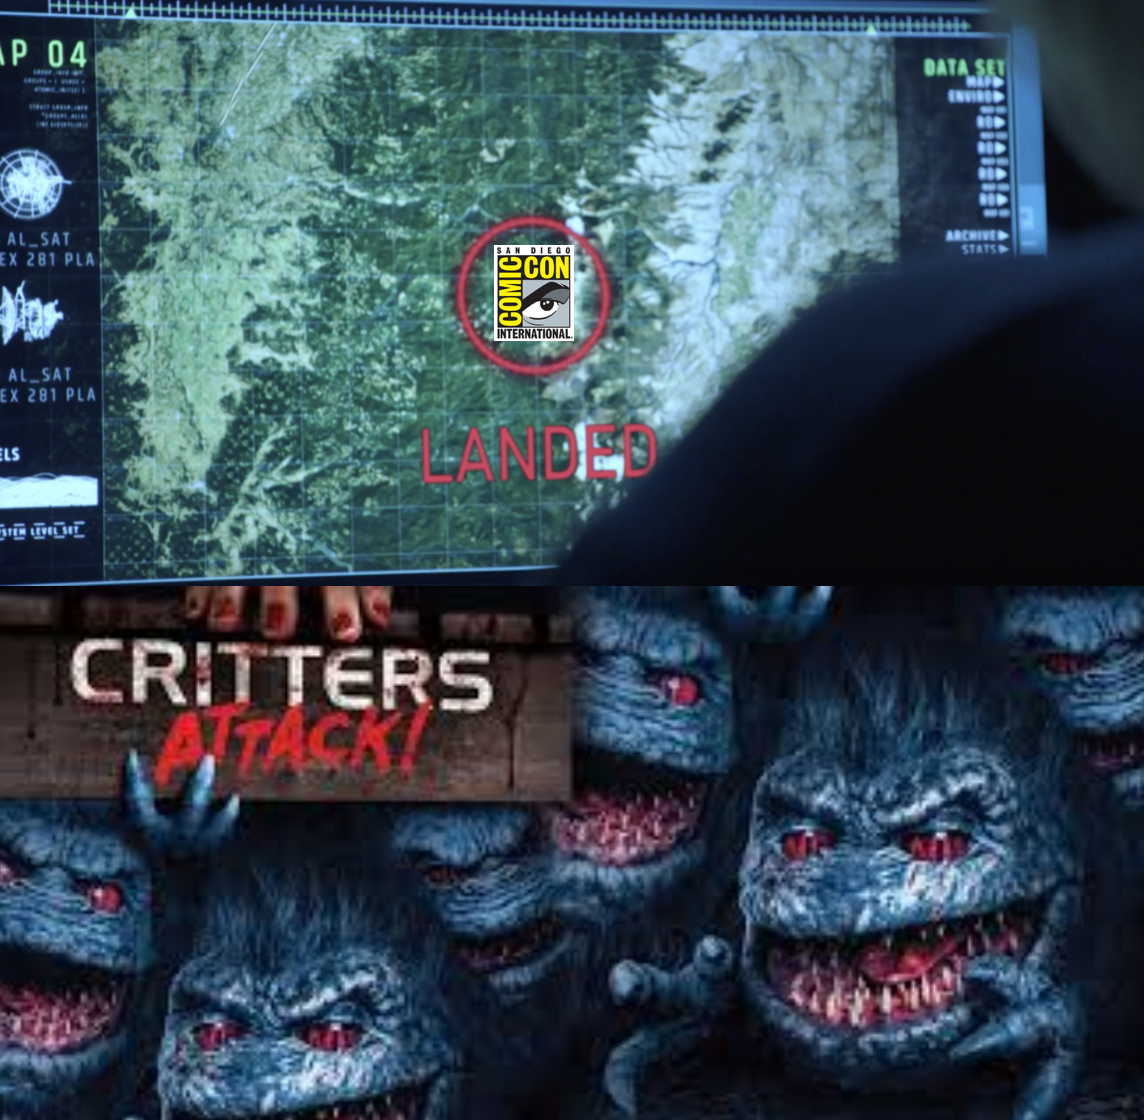 CRITTERS ATTACK: This Time SDCC is On the Menu!